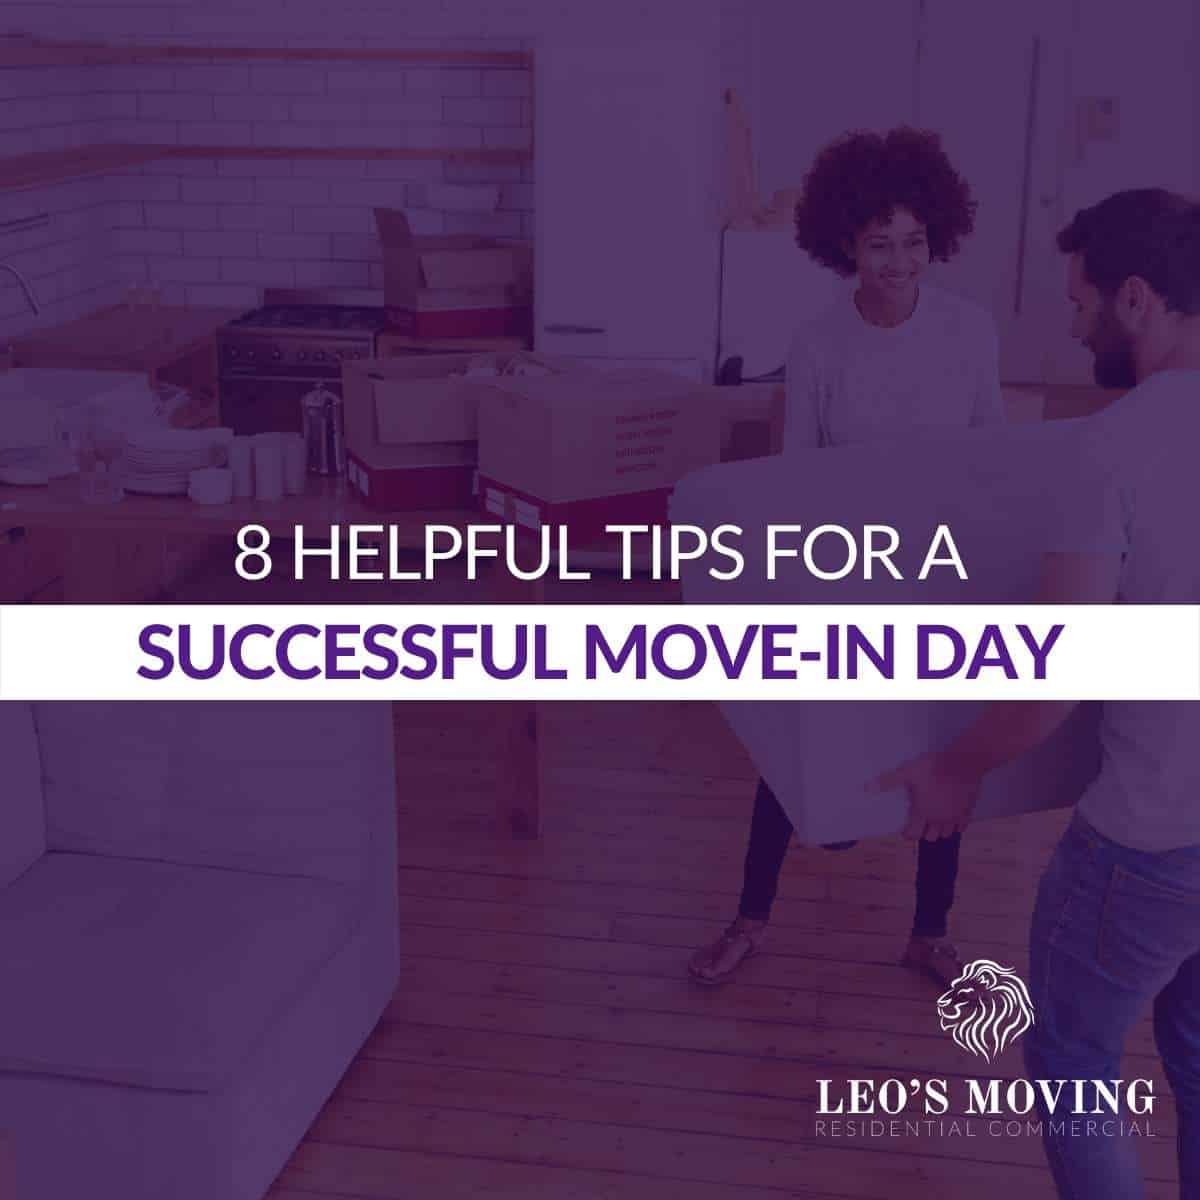 8 Helpful Tips For A Successful Move-In Day